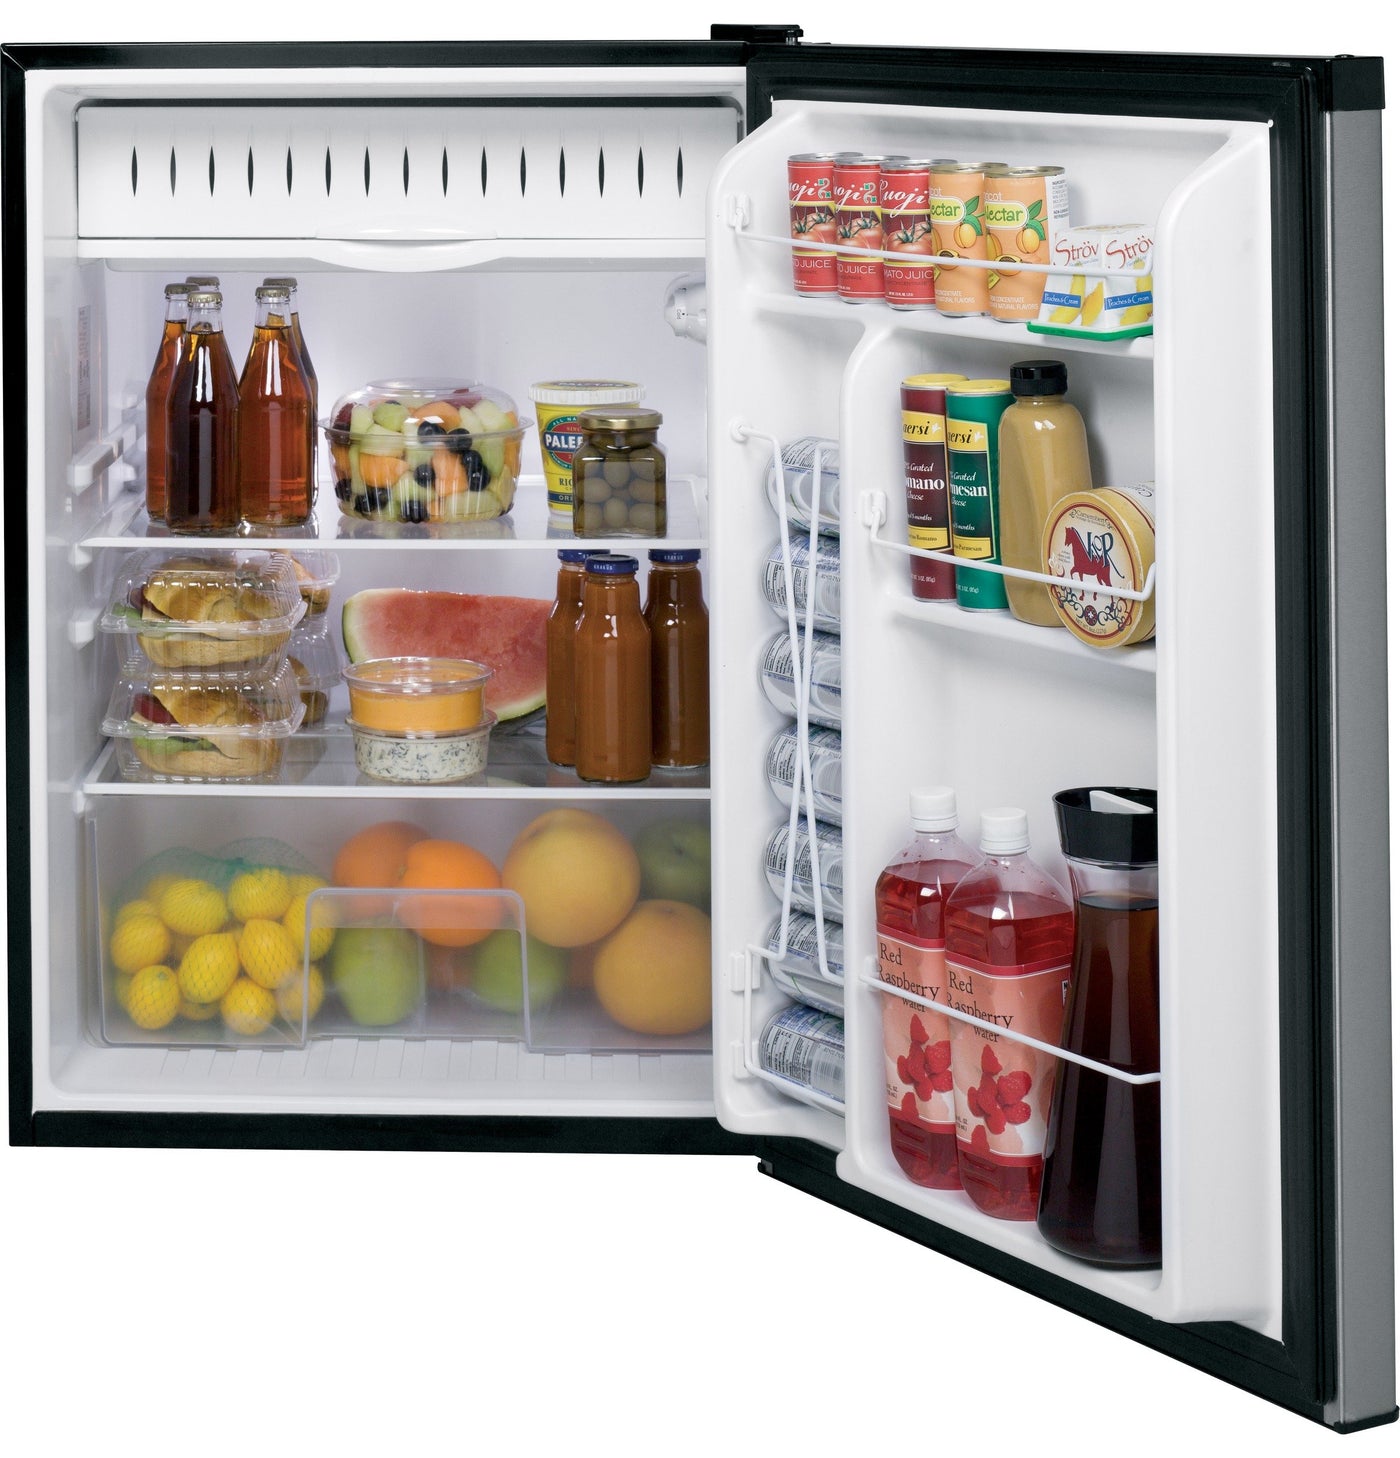 GE Stainless Steel Compact Refrigerator (5.6 Cu. Ft.) - GCE06GSHSB